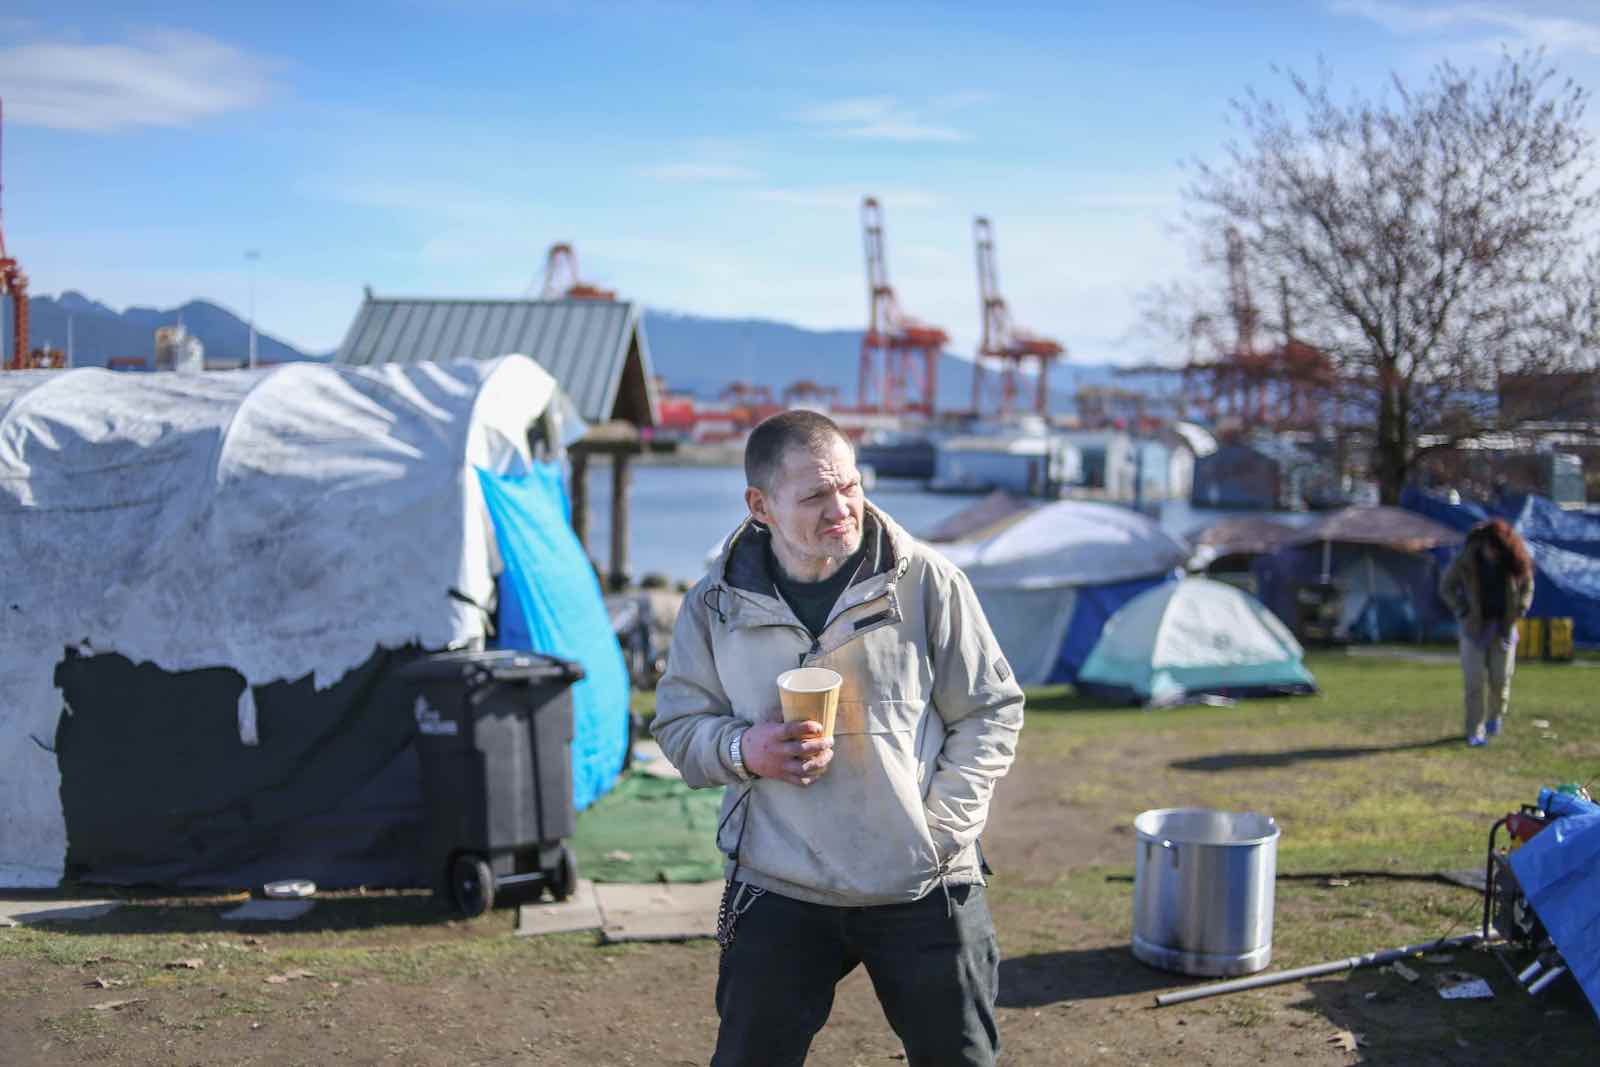 A man with short hair stands in a camp area, holding a coffee cup.